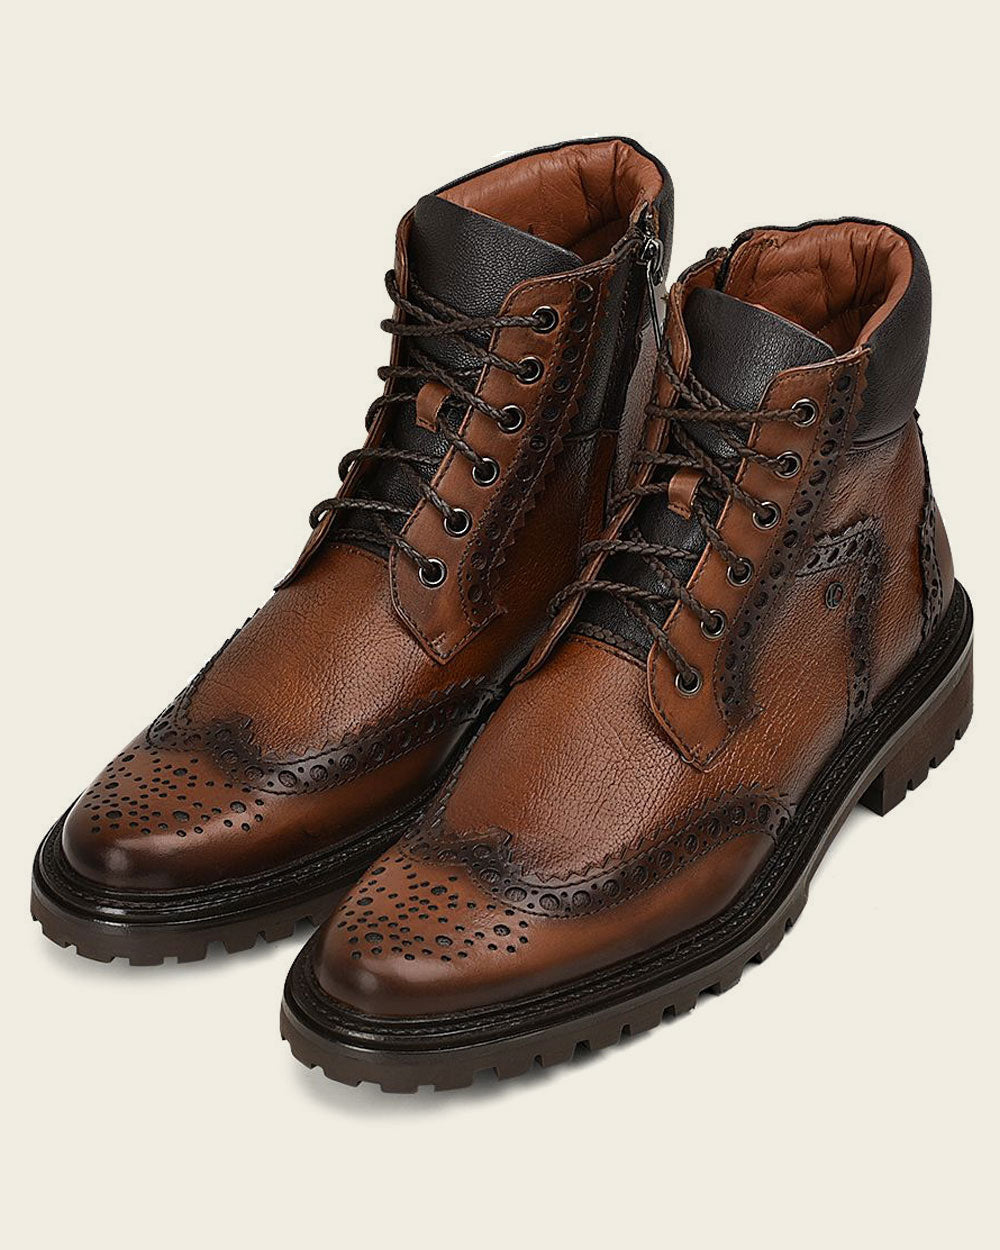 Introducing the ultimate blend of style and functionality, our men's boot crafted from premium bovine leather is a must-have addition to your footwear collection. With meticulous attention to detail, this boot seamlessly combines classic design with modern elements for a standout look on any occasion.